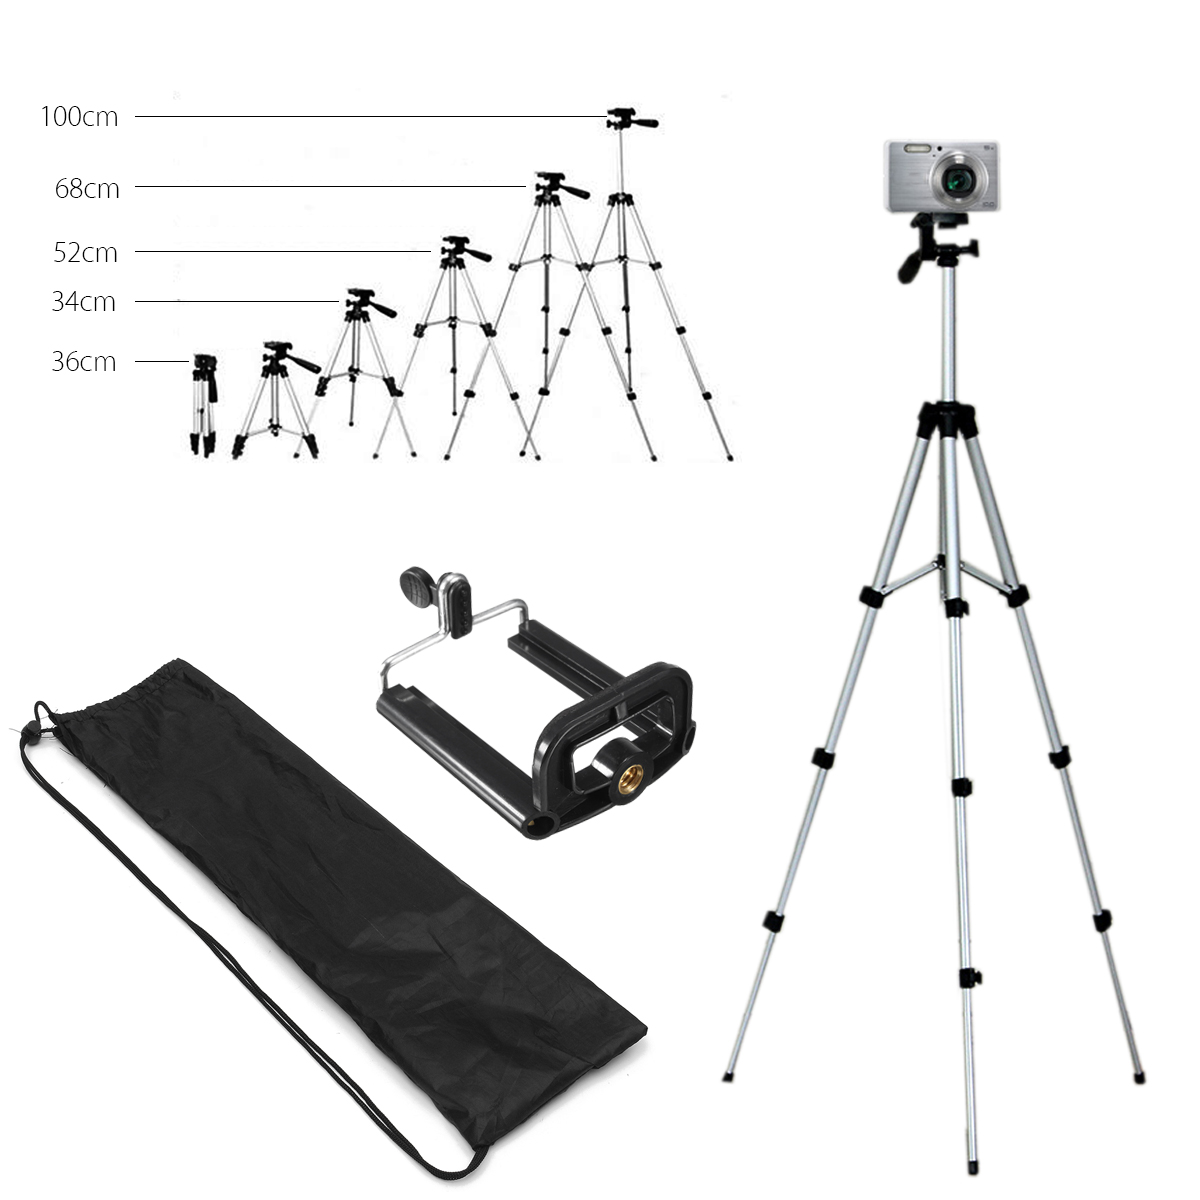 Bakeey Professional Camera Adjustable Tripod Stand Holder Live Selfie Stick for iPhone 8 Plus X S8 S9